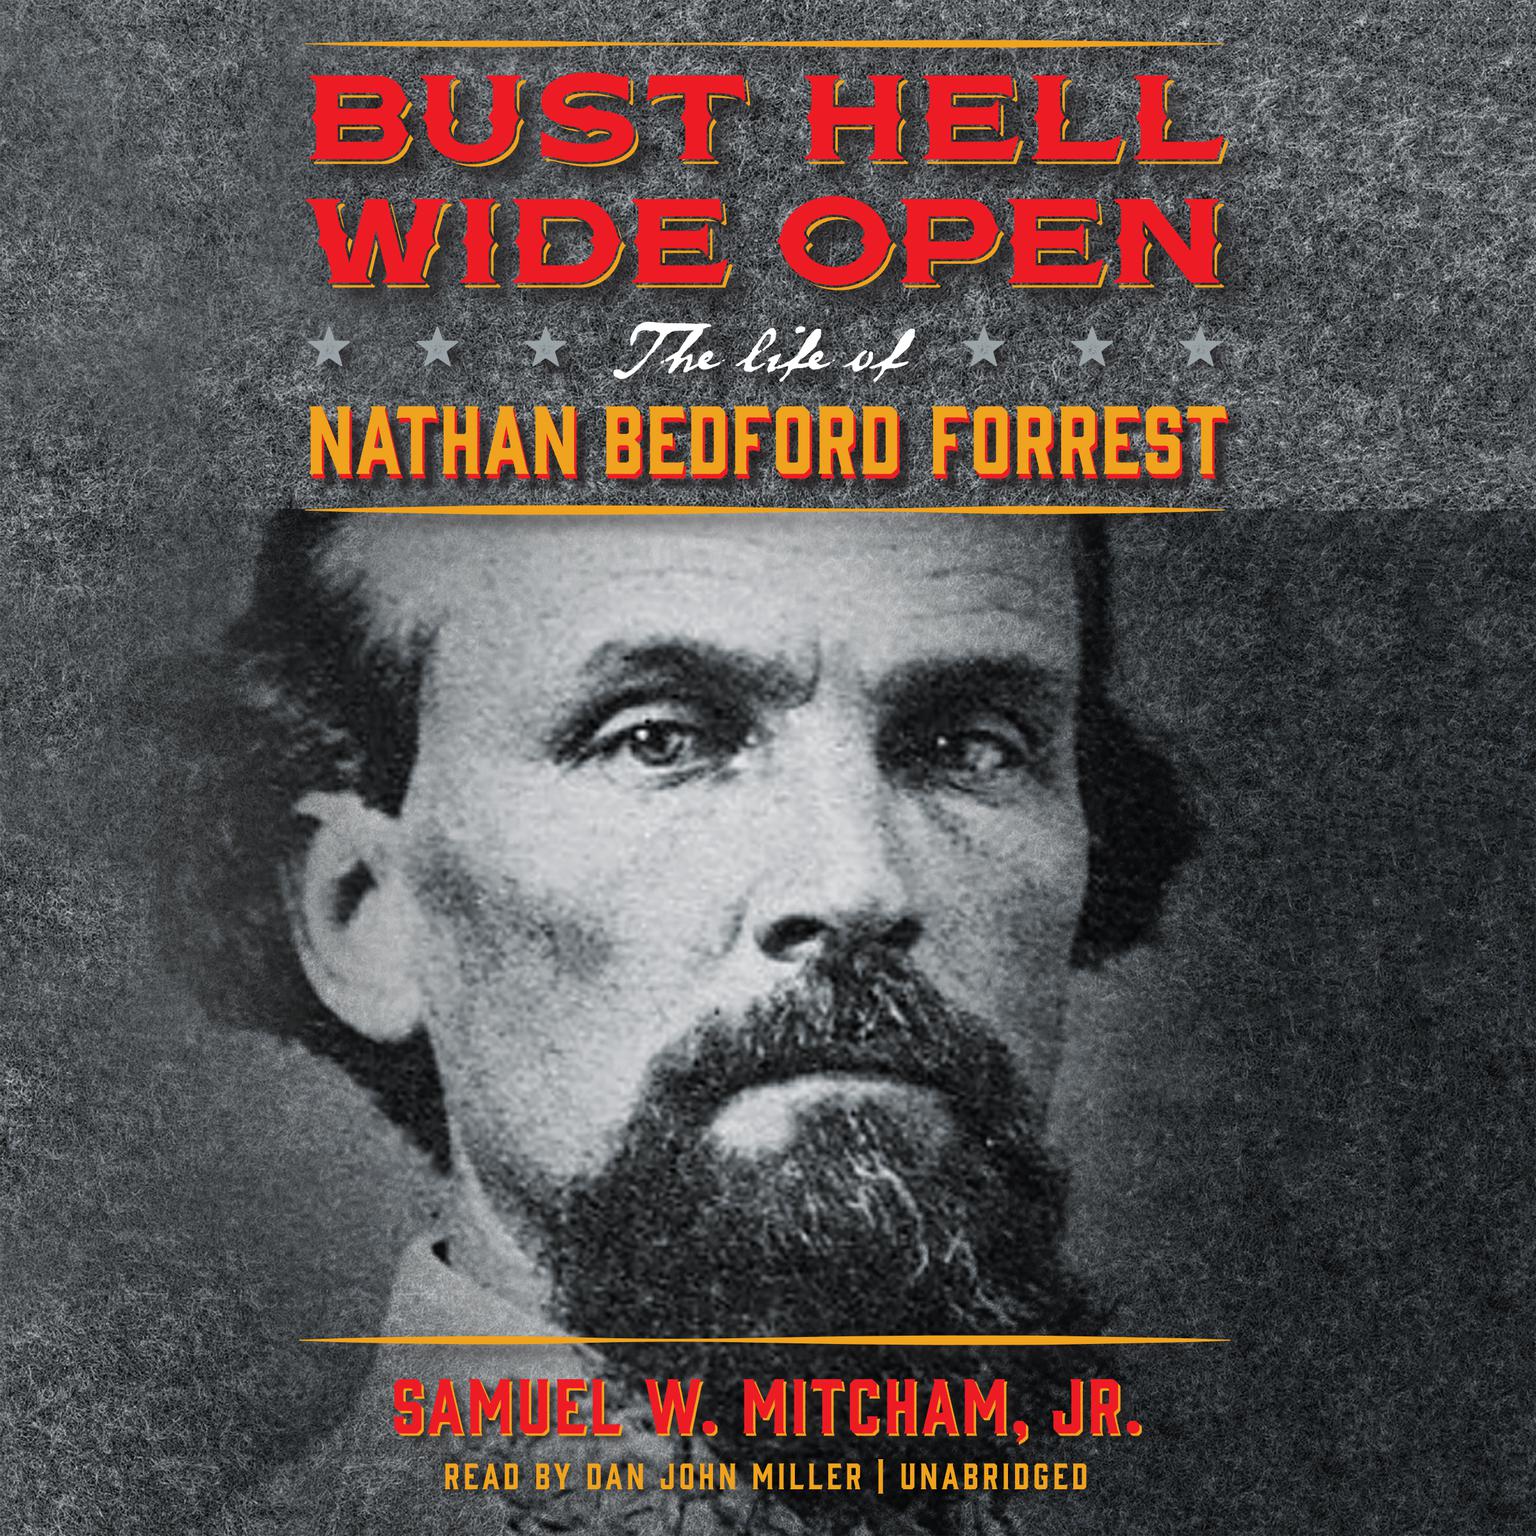 Bust Hell Wide Open: The Life of Nathan Bedford Forrest Audiobook, by Samuel W. Mitcham